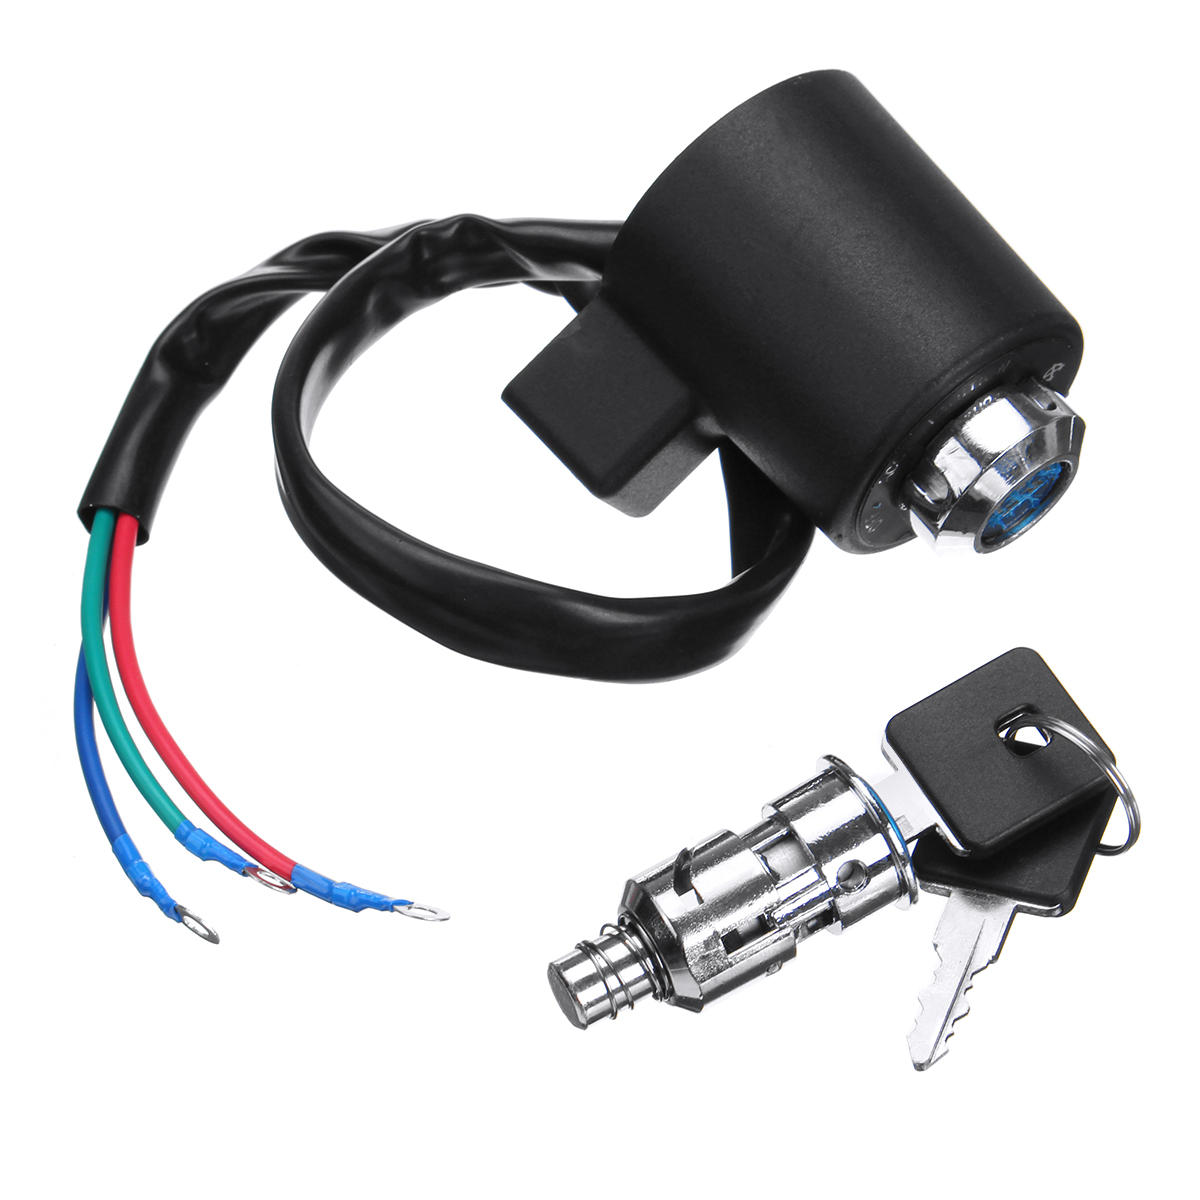 Ignition Key Coil Switch 3 Wire For Harley Davidson XL FX Round Barrel Key For Sportster For Dyna